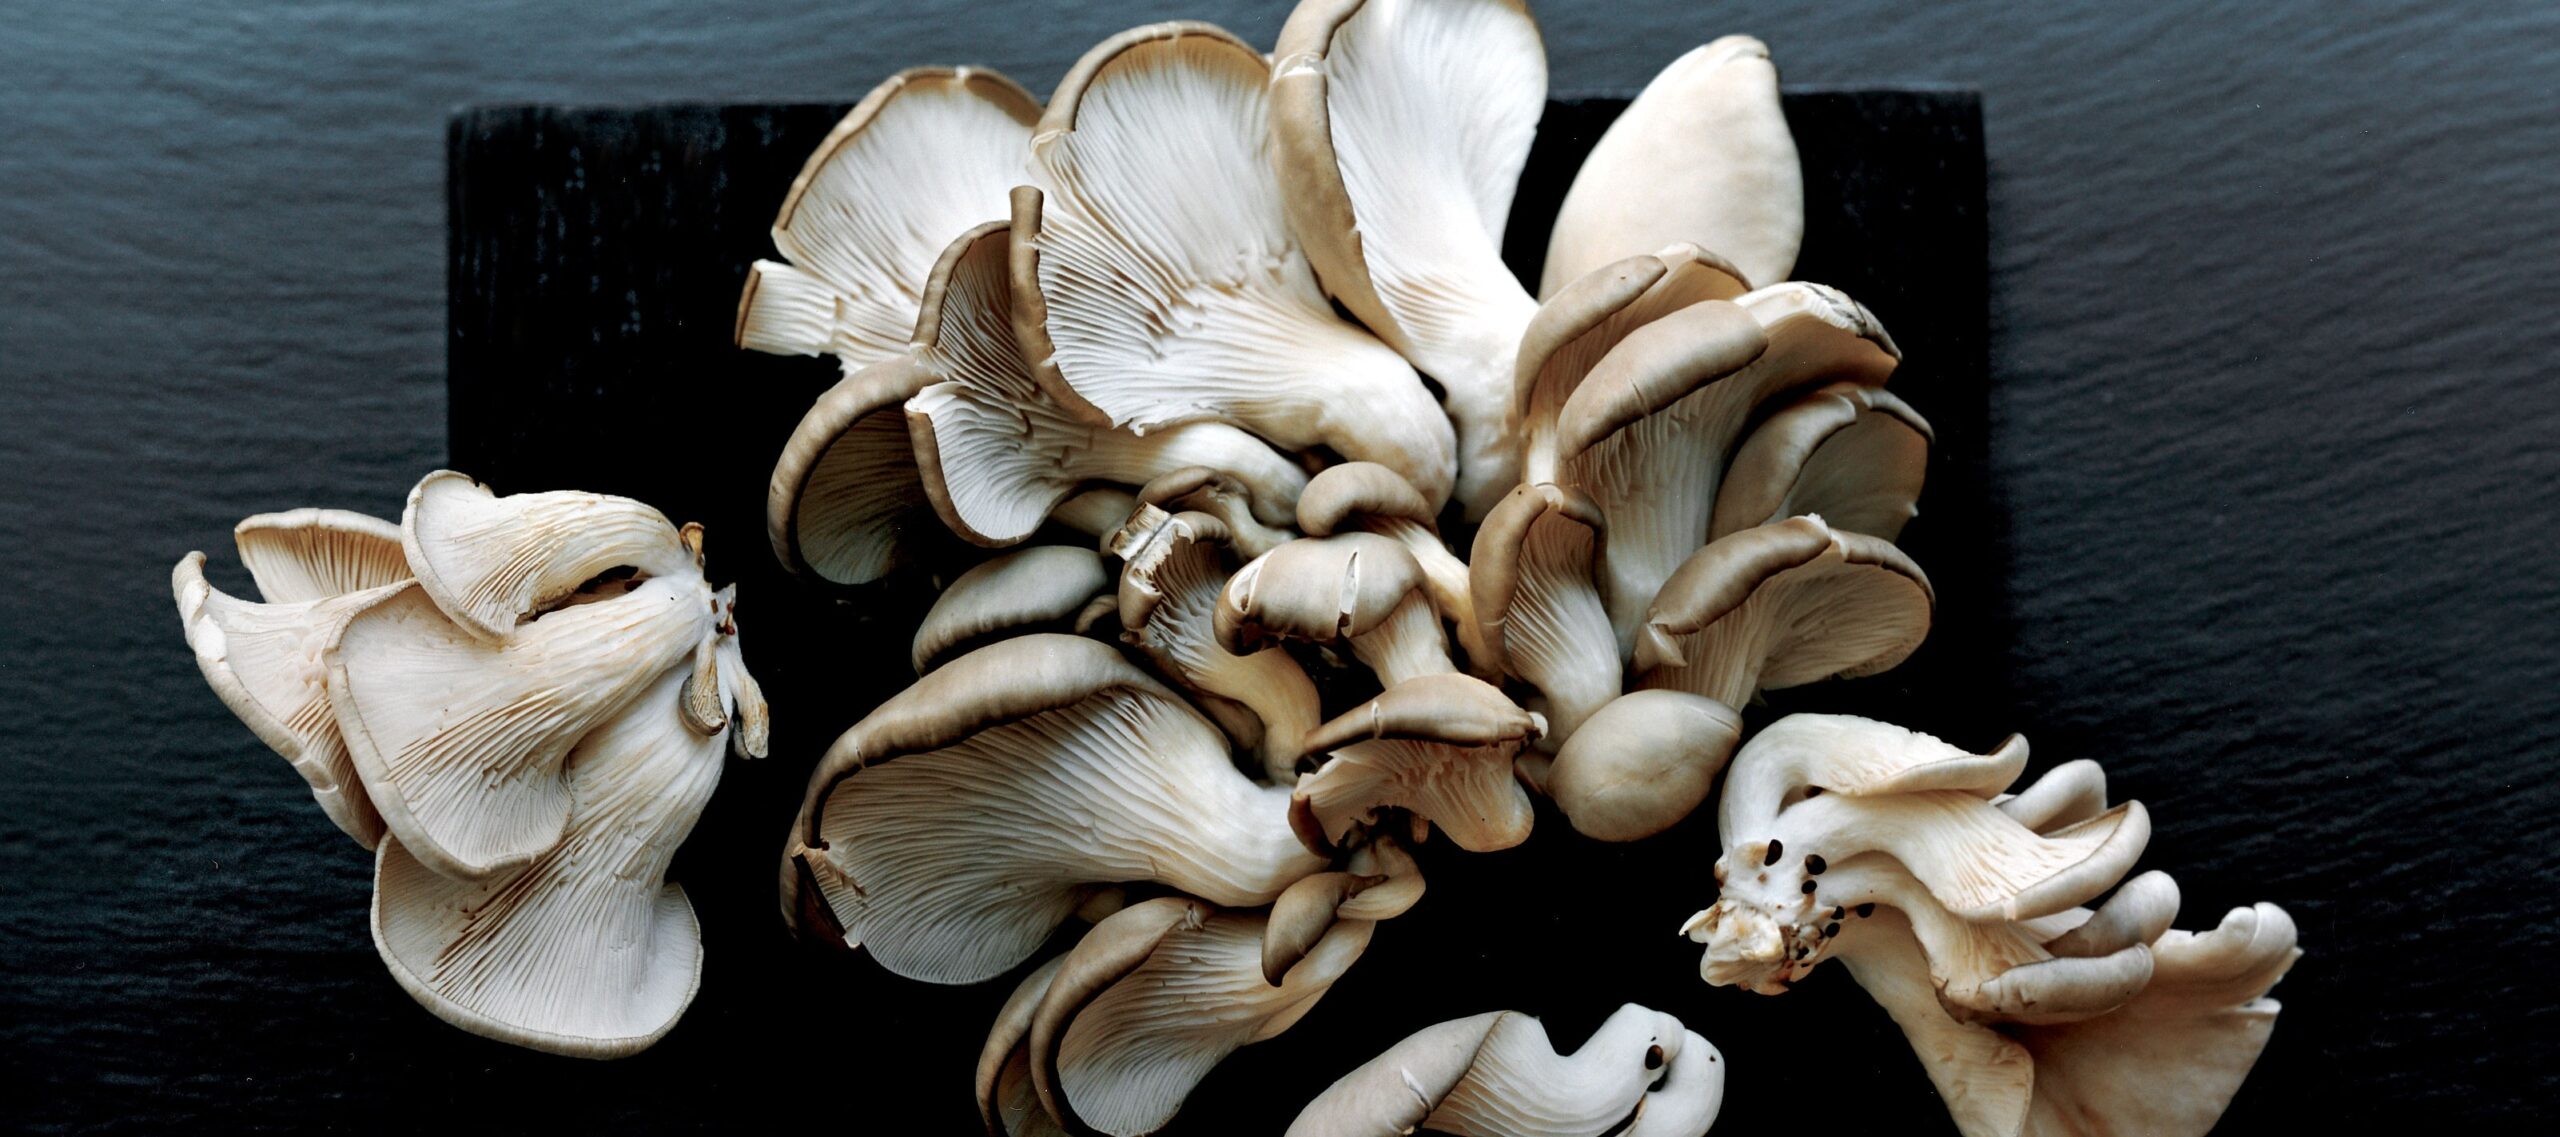 Best Places to Grow Mushrooms at Home